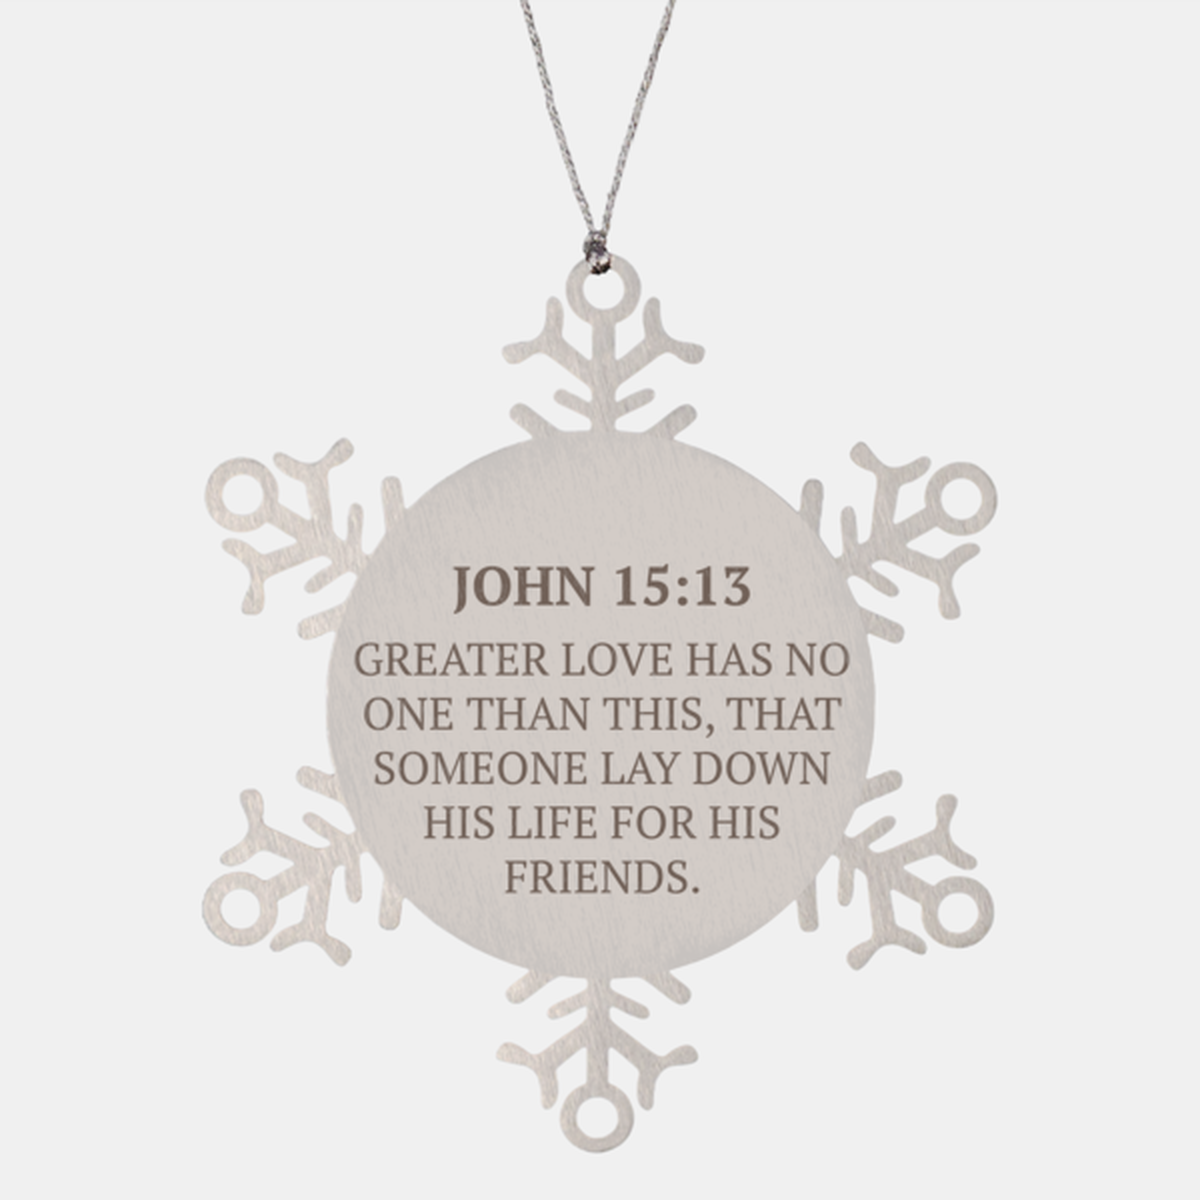 Christian Ornaments For Christmas Tree, Greater Love Has No One Than This, Religious Christmas Decorations, Scripture Ornaments Gifts, Bible Verse Ornament